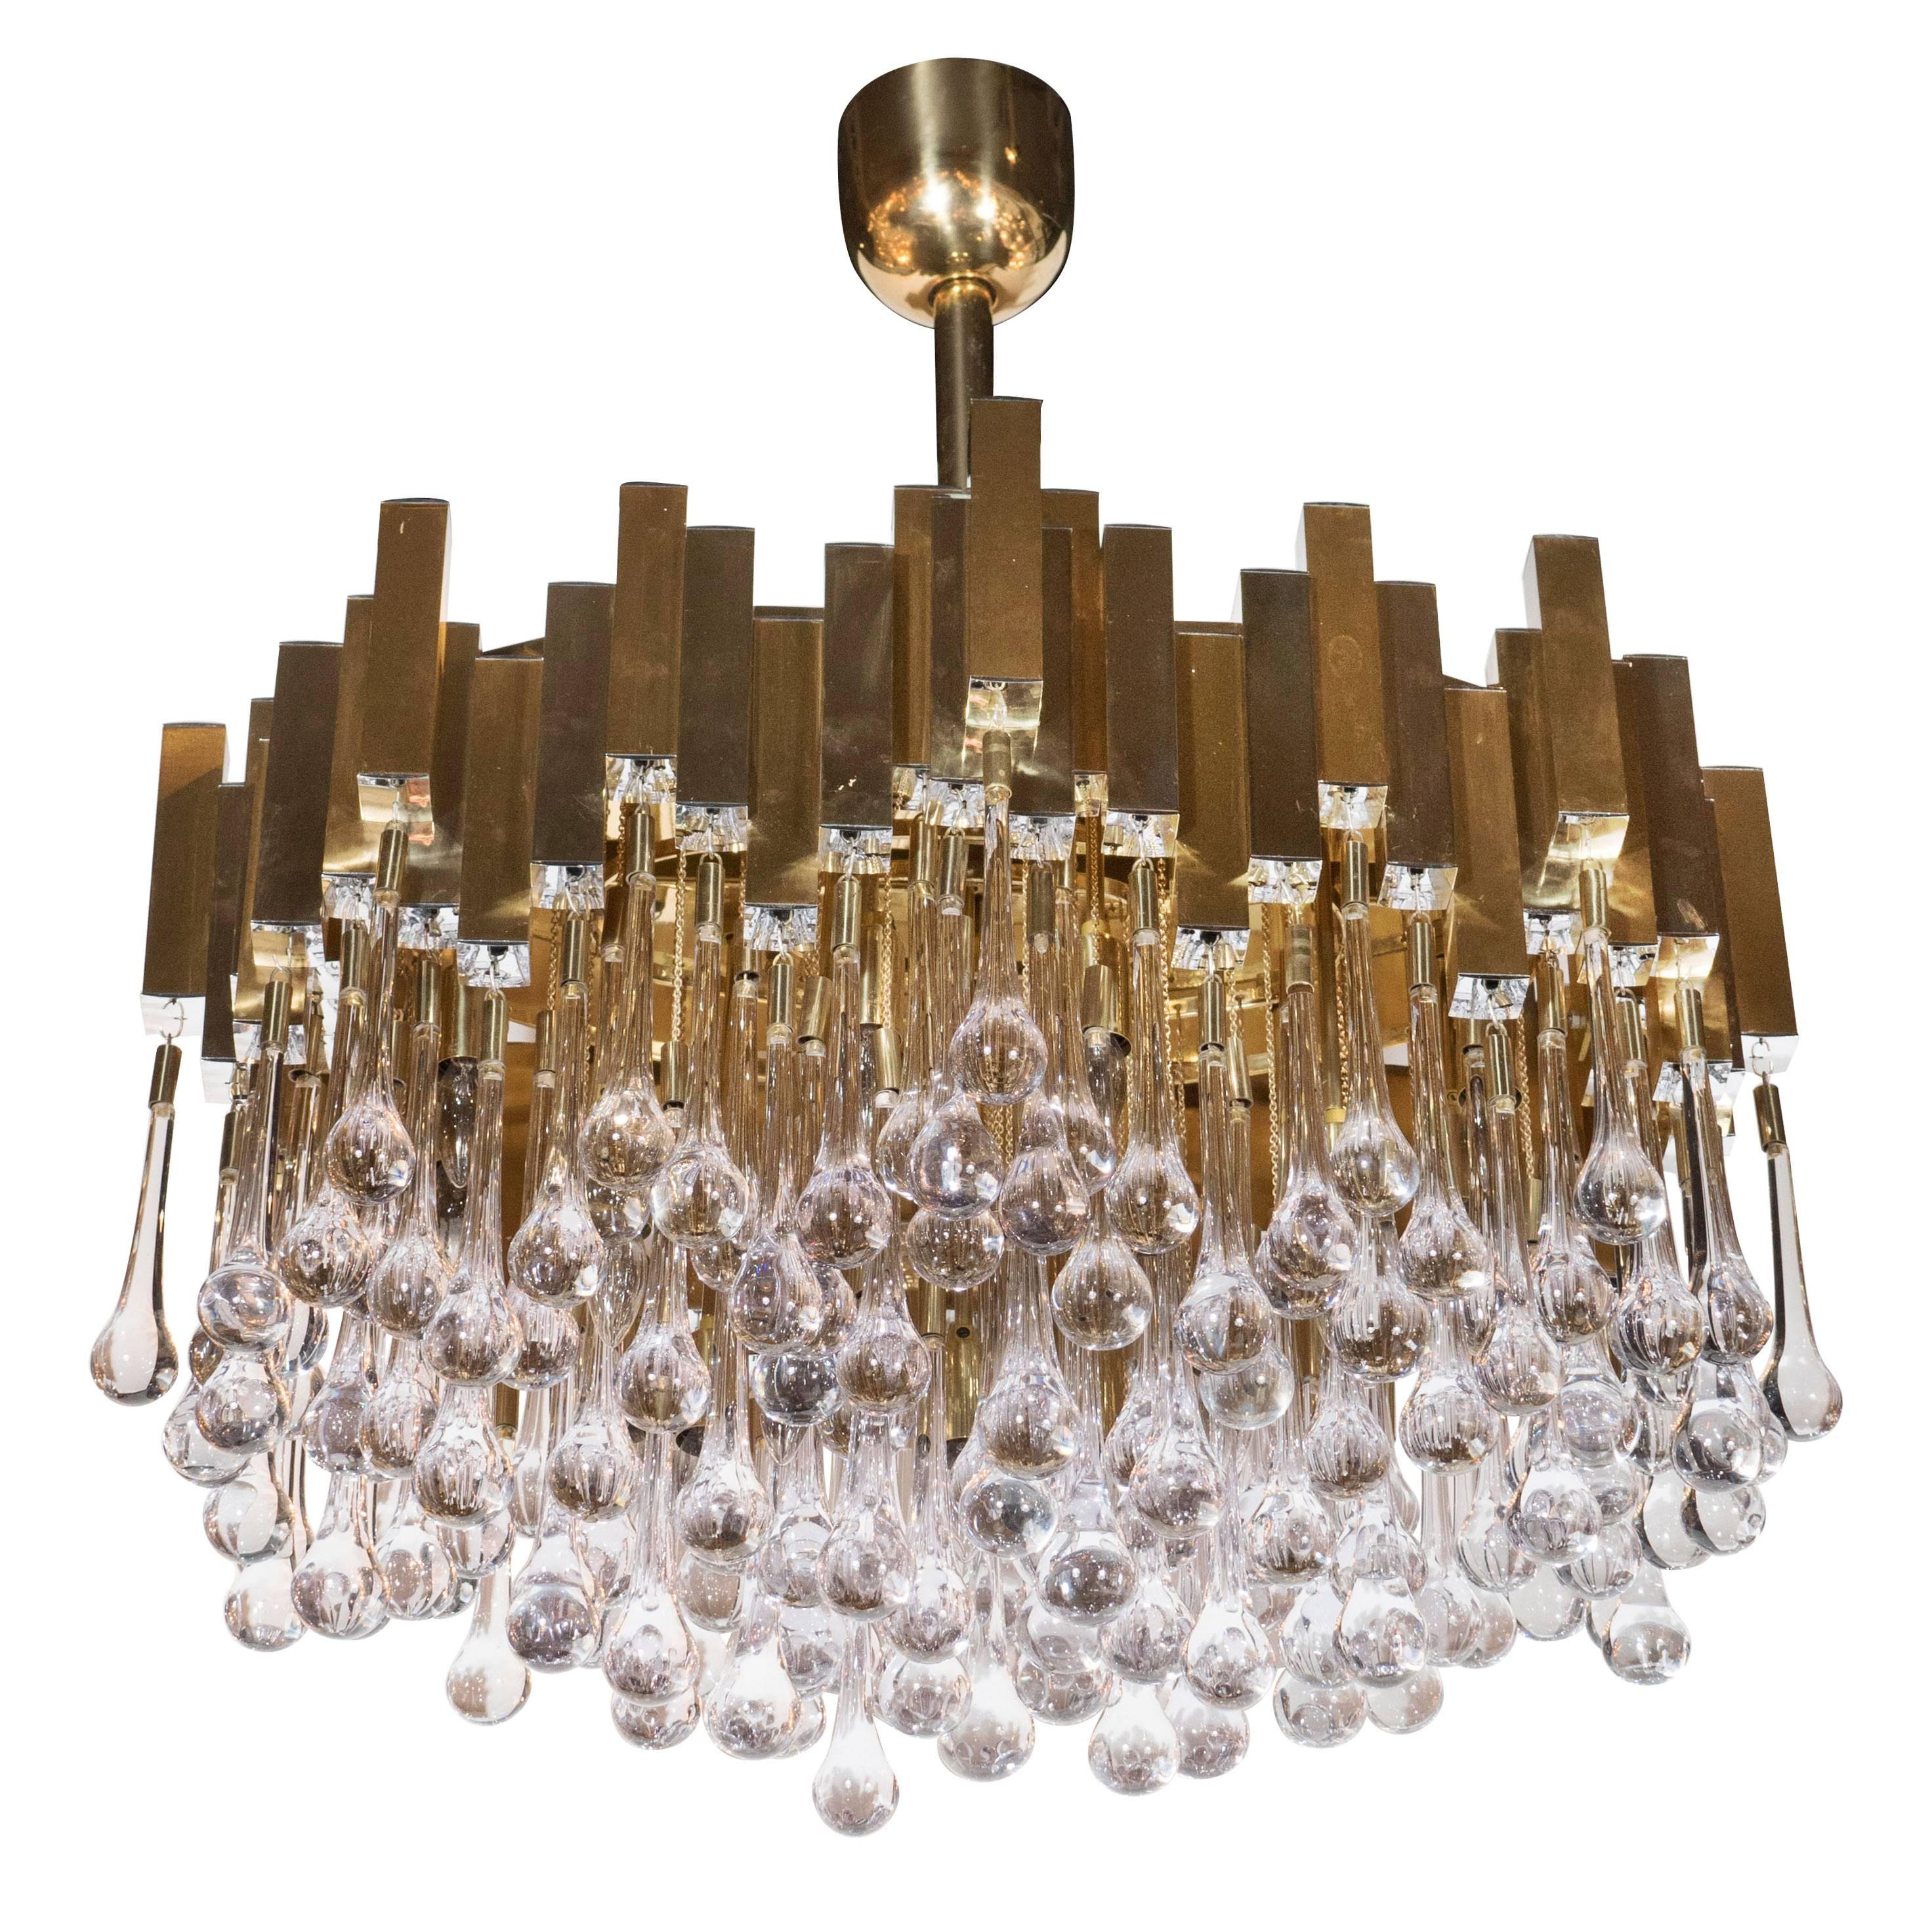 Brass and Crystal "Droplet" Chandelier by Sciolari﻿